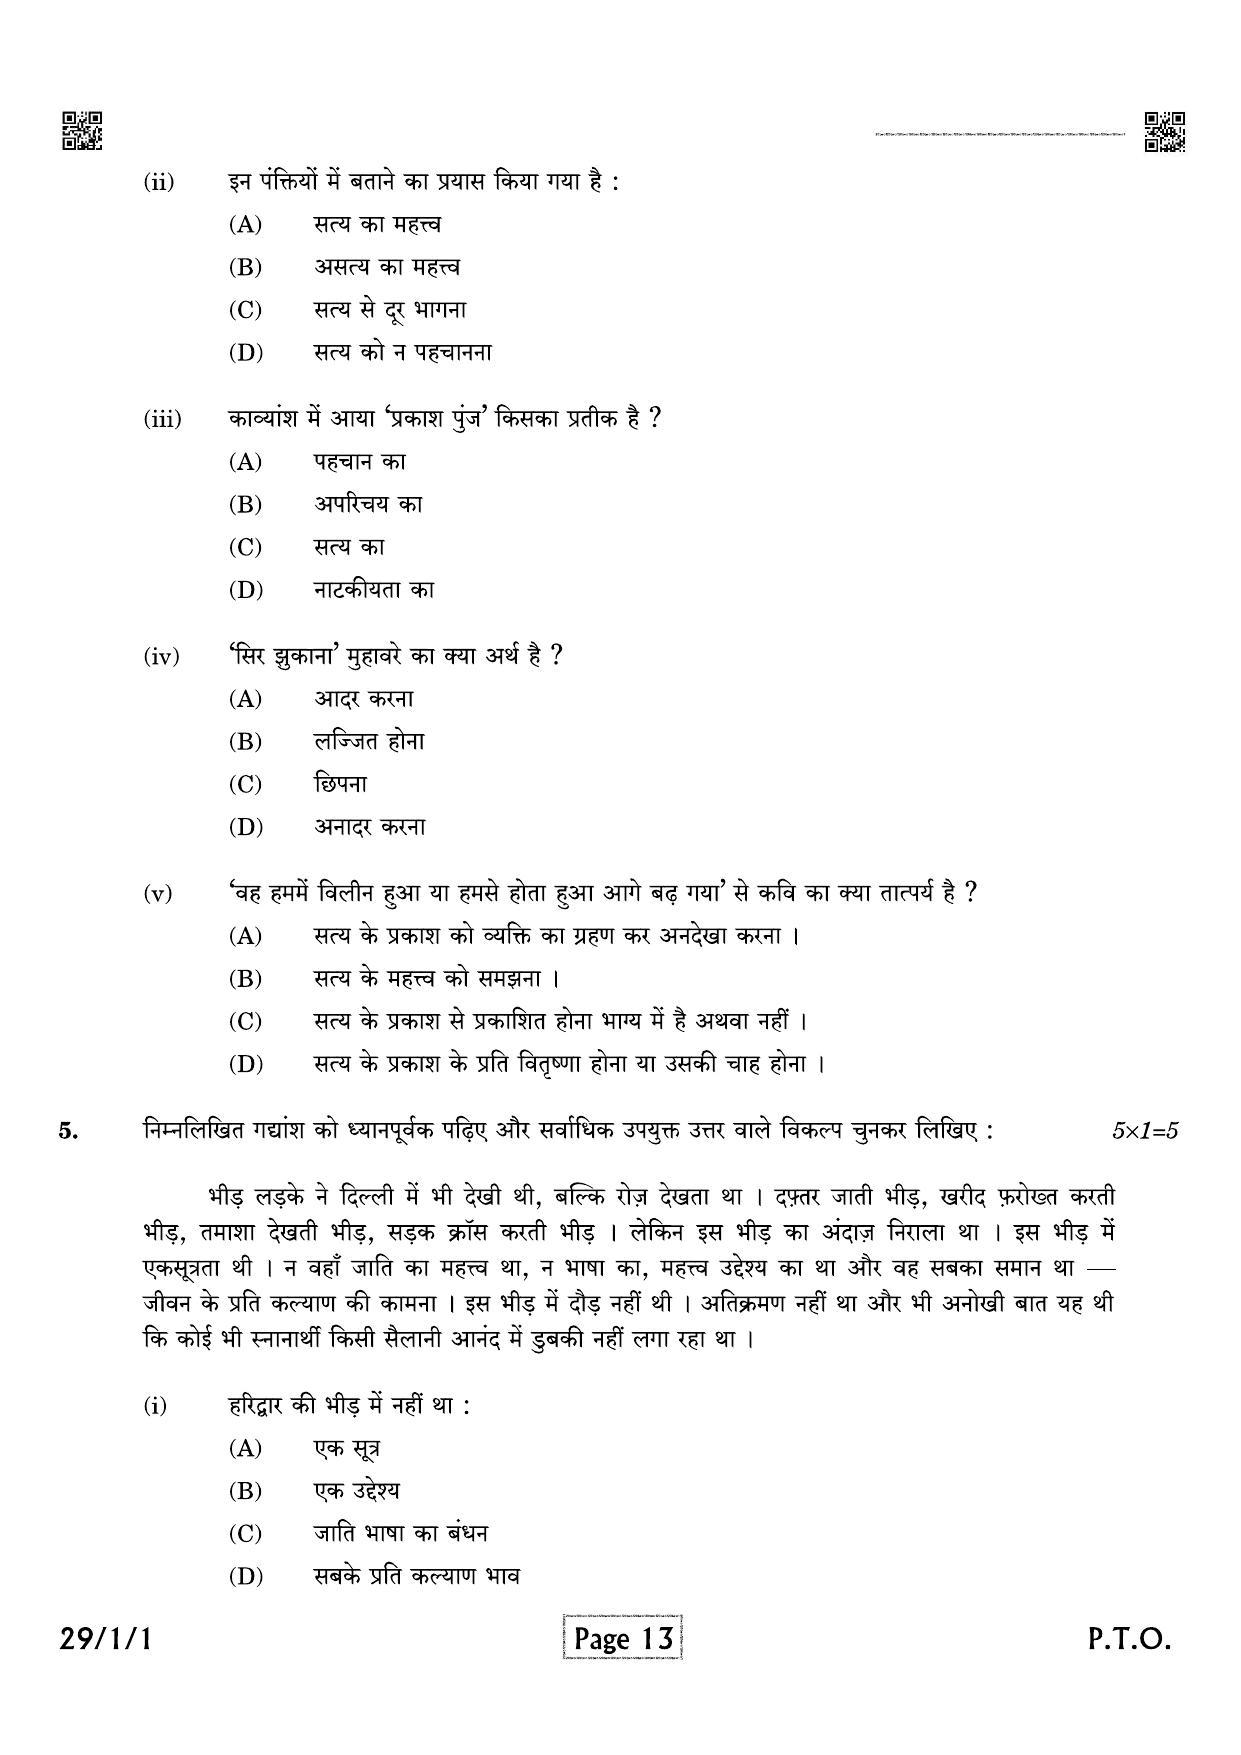 CBSE Class 12 QP_002_HINDI_ELECTIVE 2021 Compartment Question Paper - Page 13